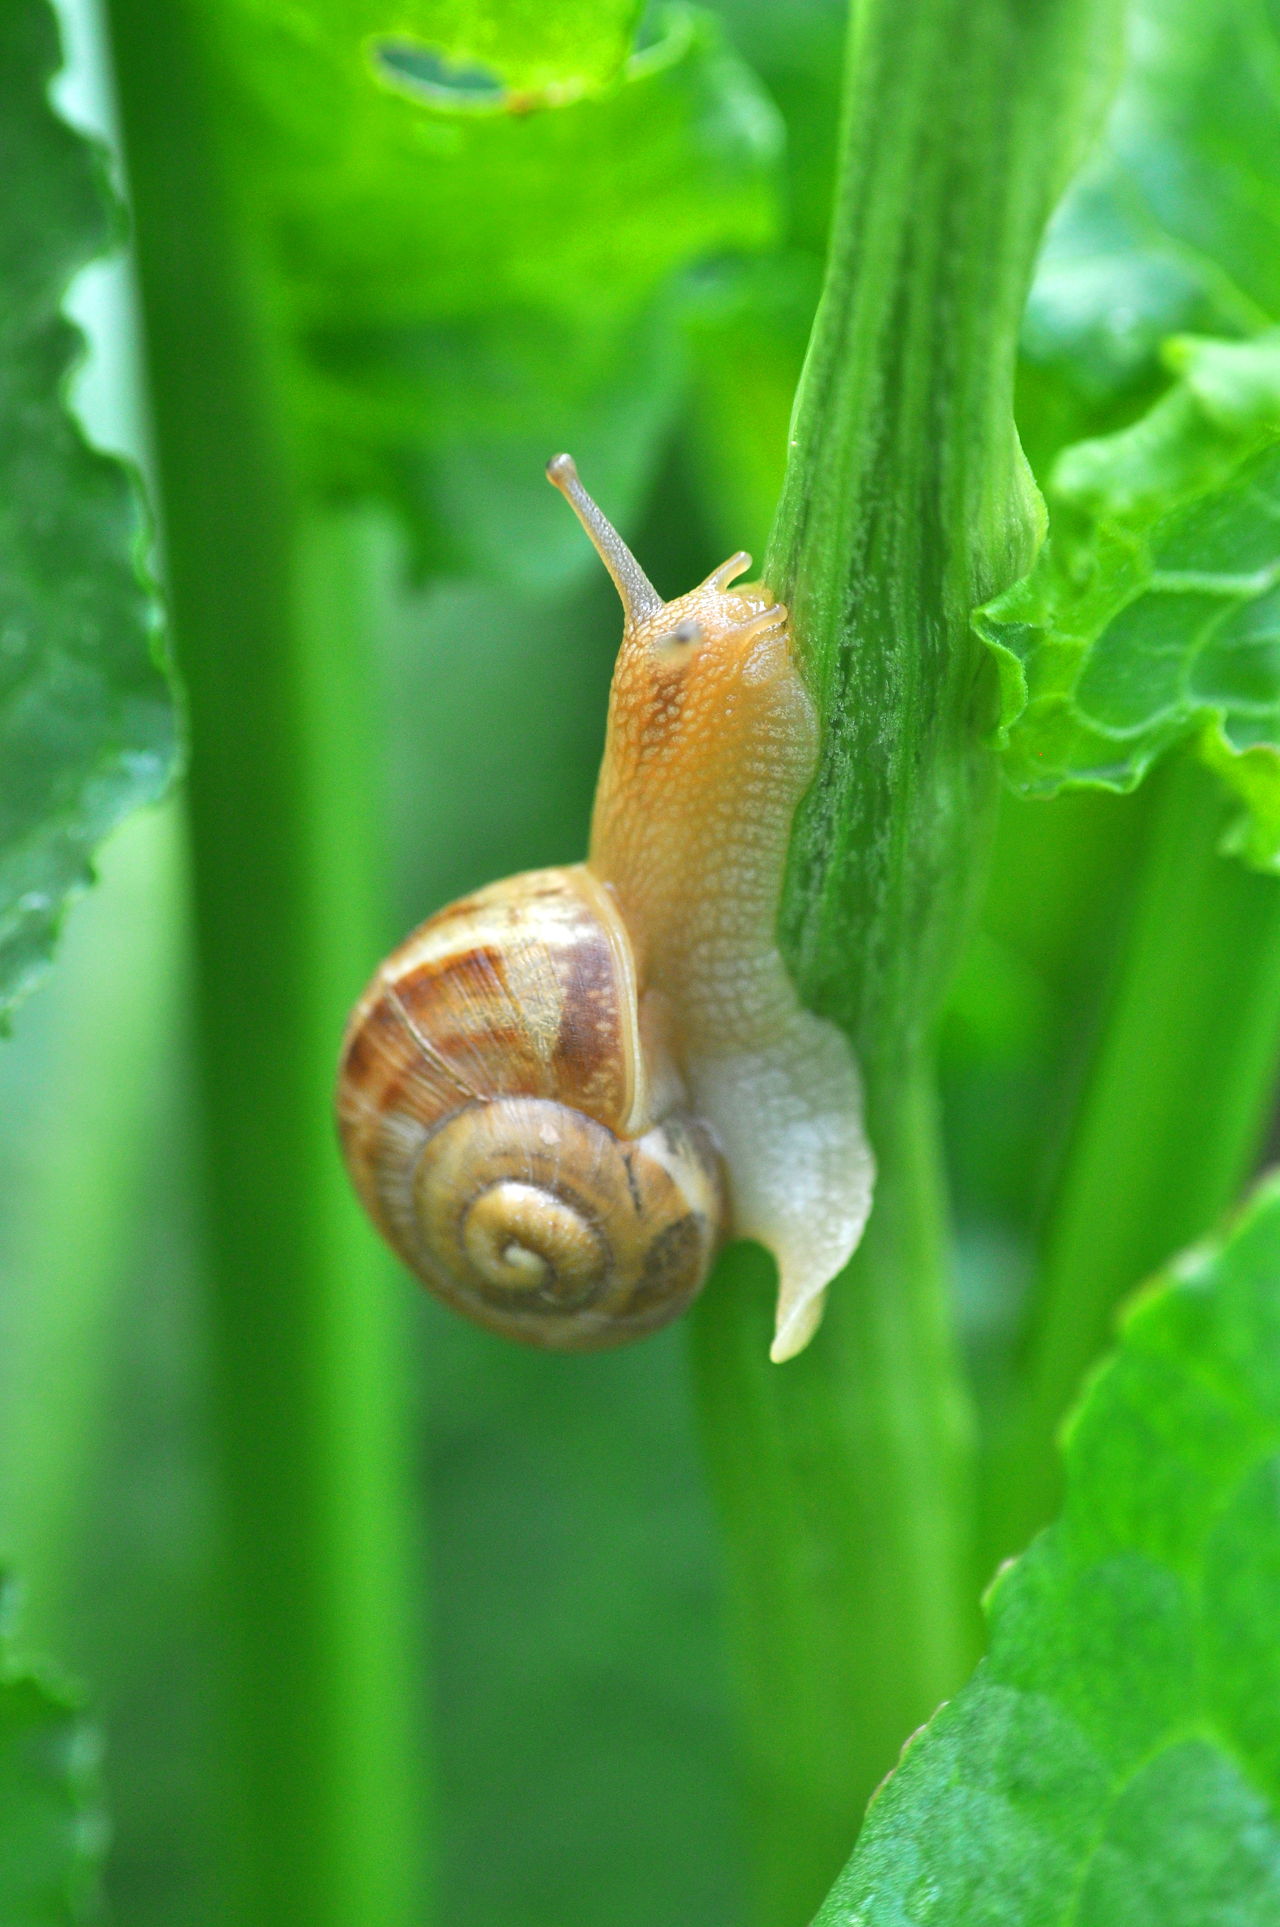 A Shell of a Home: Facts About the Ear-less Snails